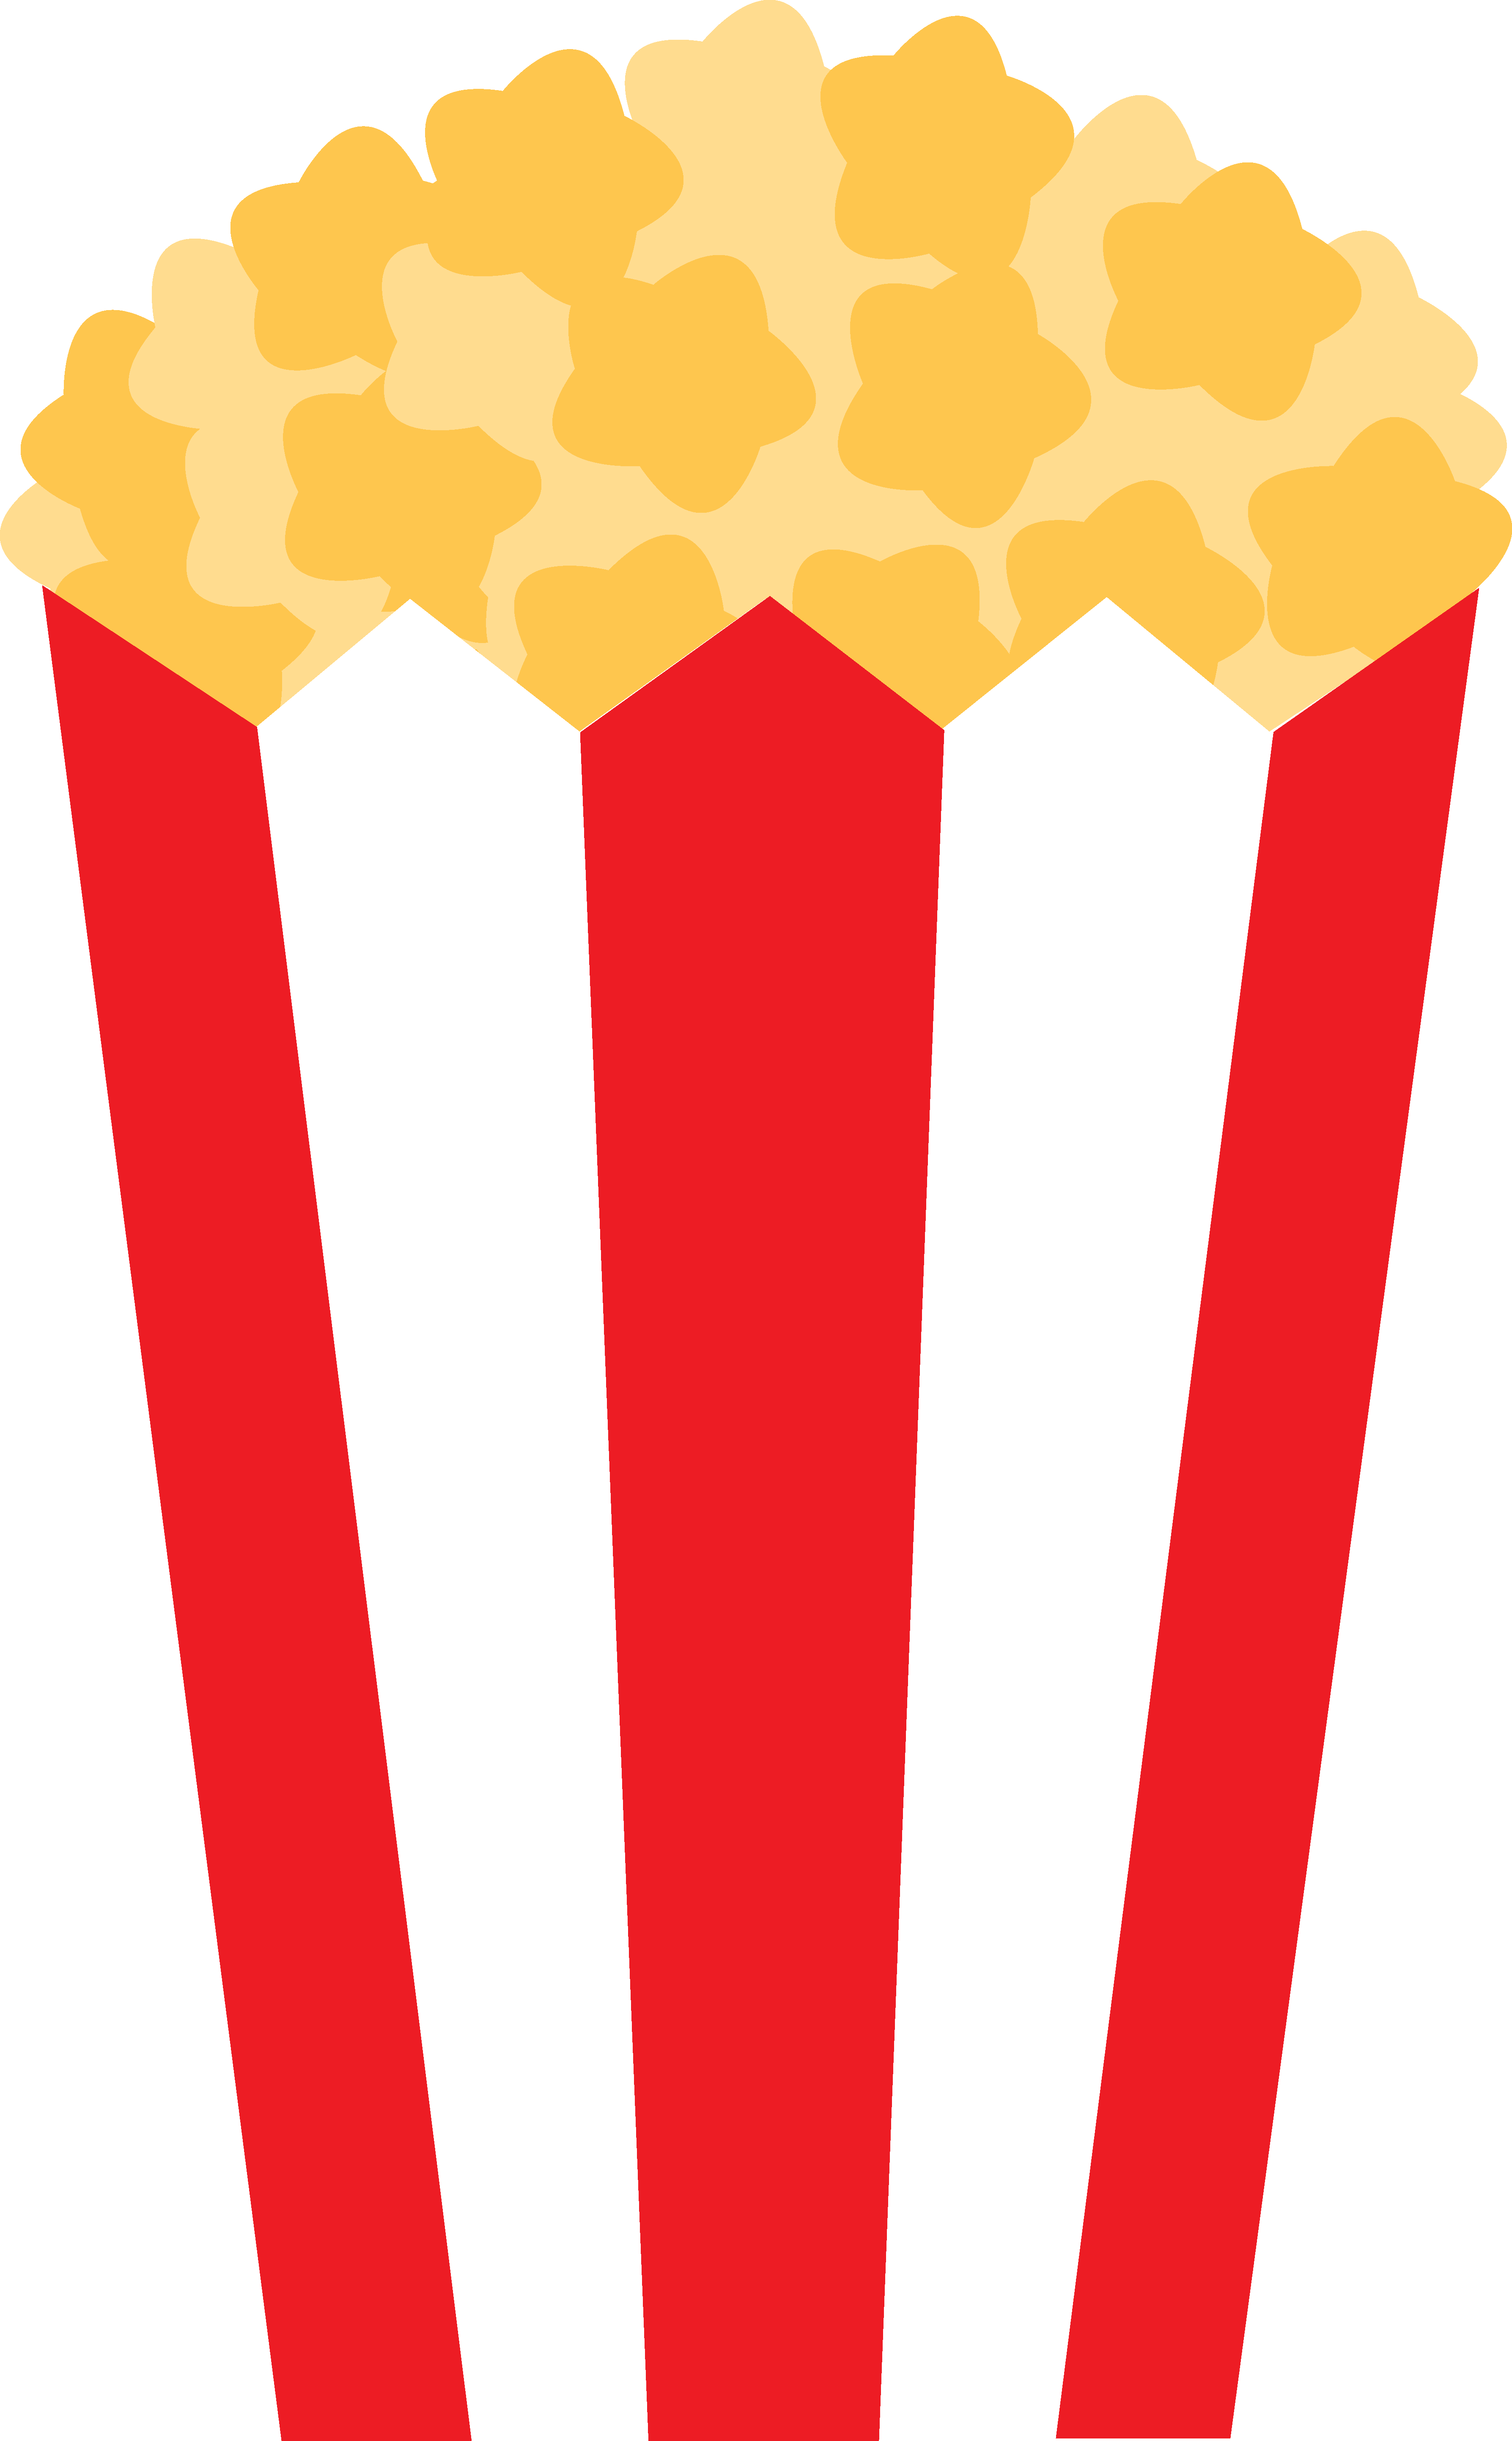 Popcorn Bag Clipart - Free Clipart Images